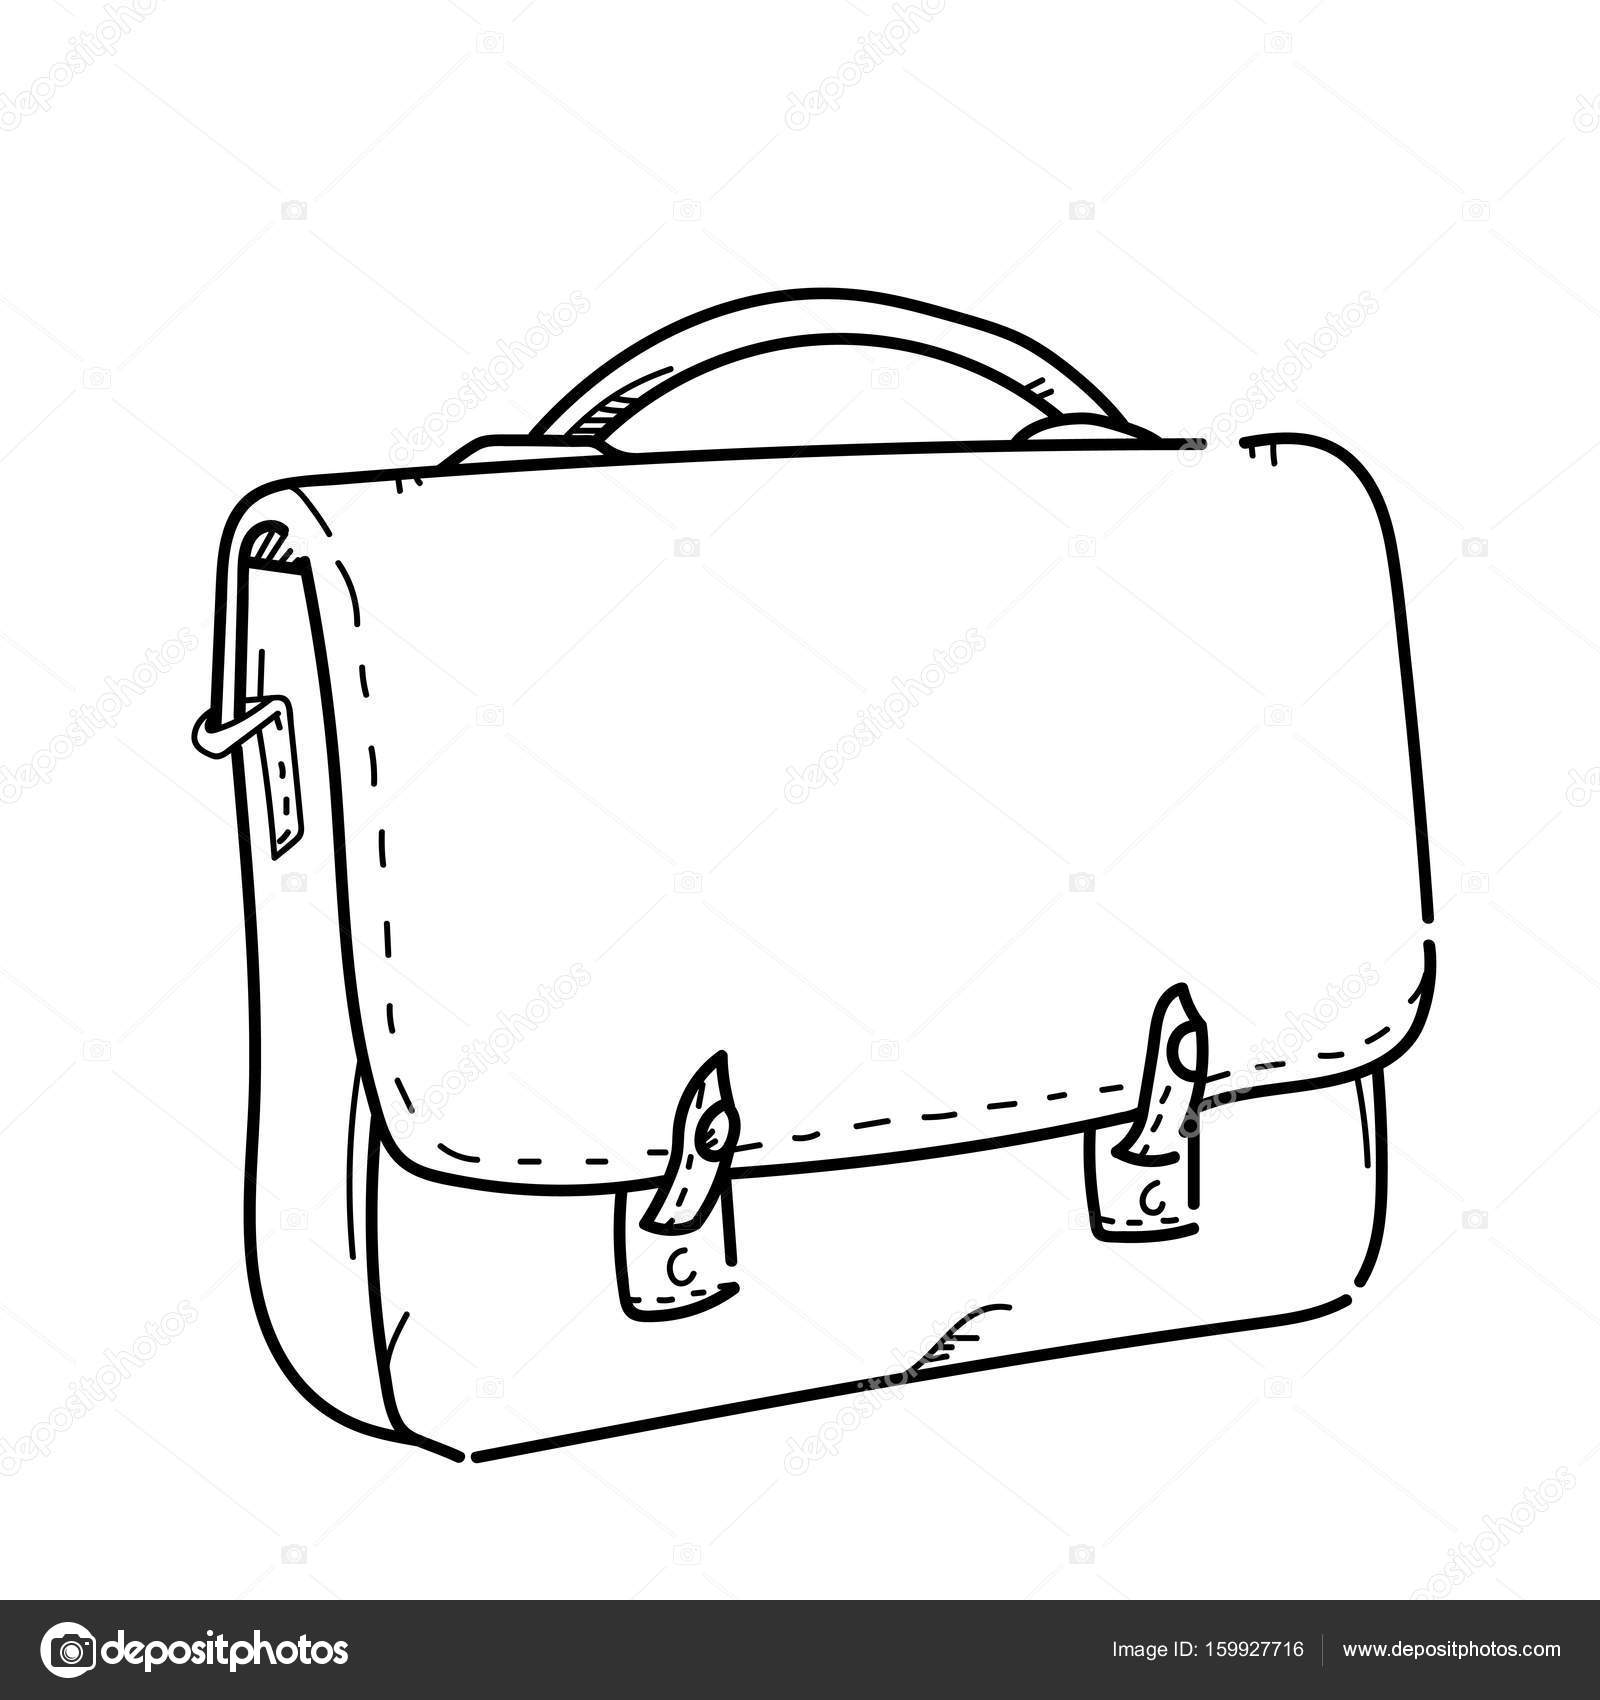 Briefcase For Tourism Freehand Drawing Illustration Stock Photo By ...